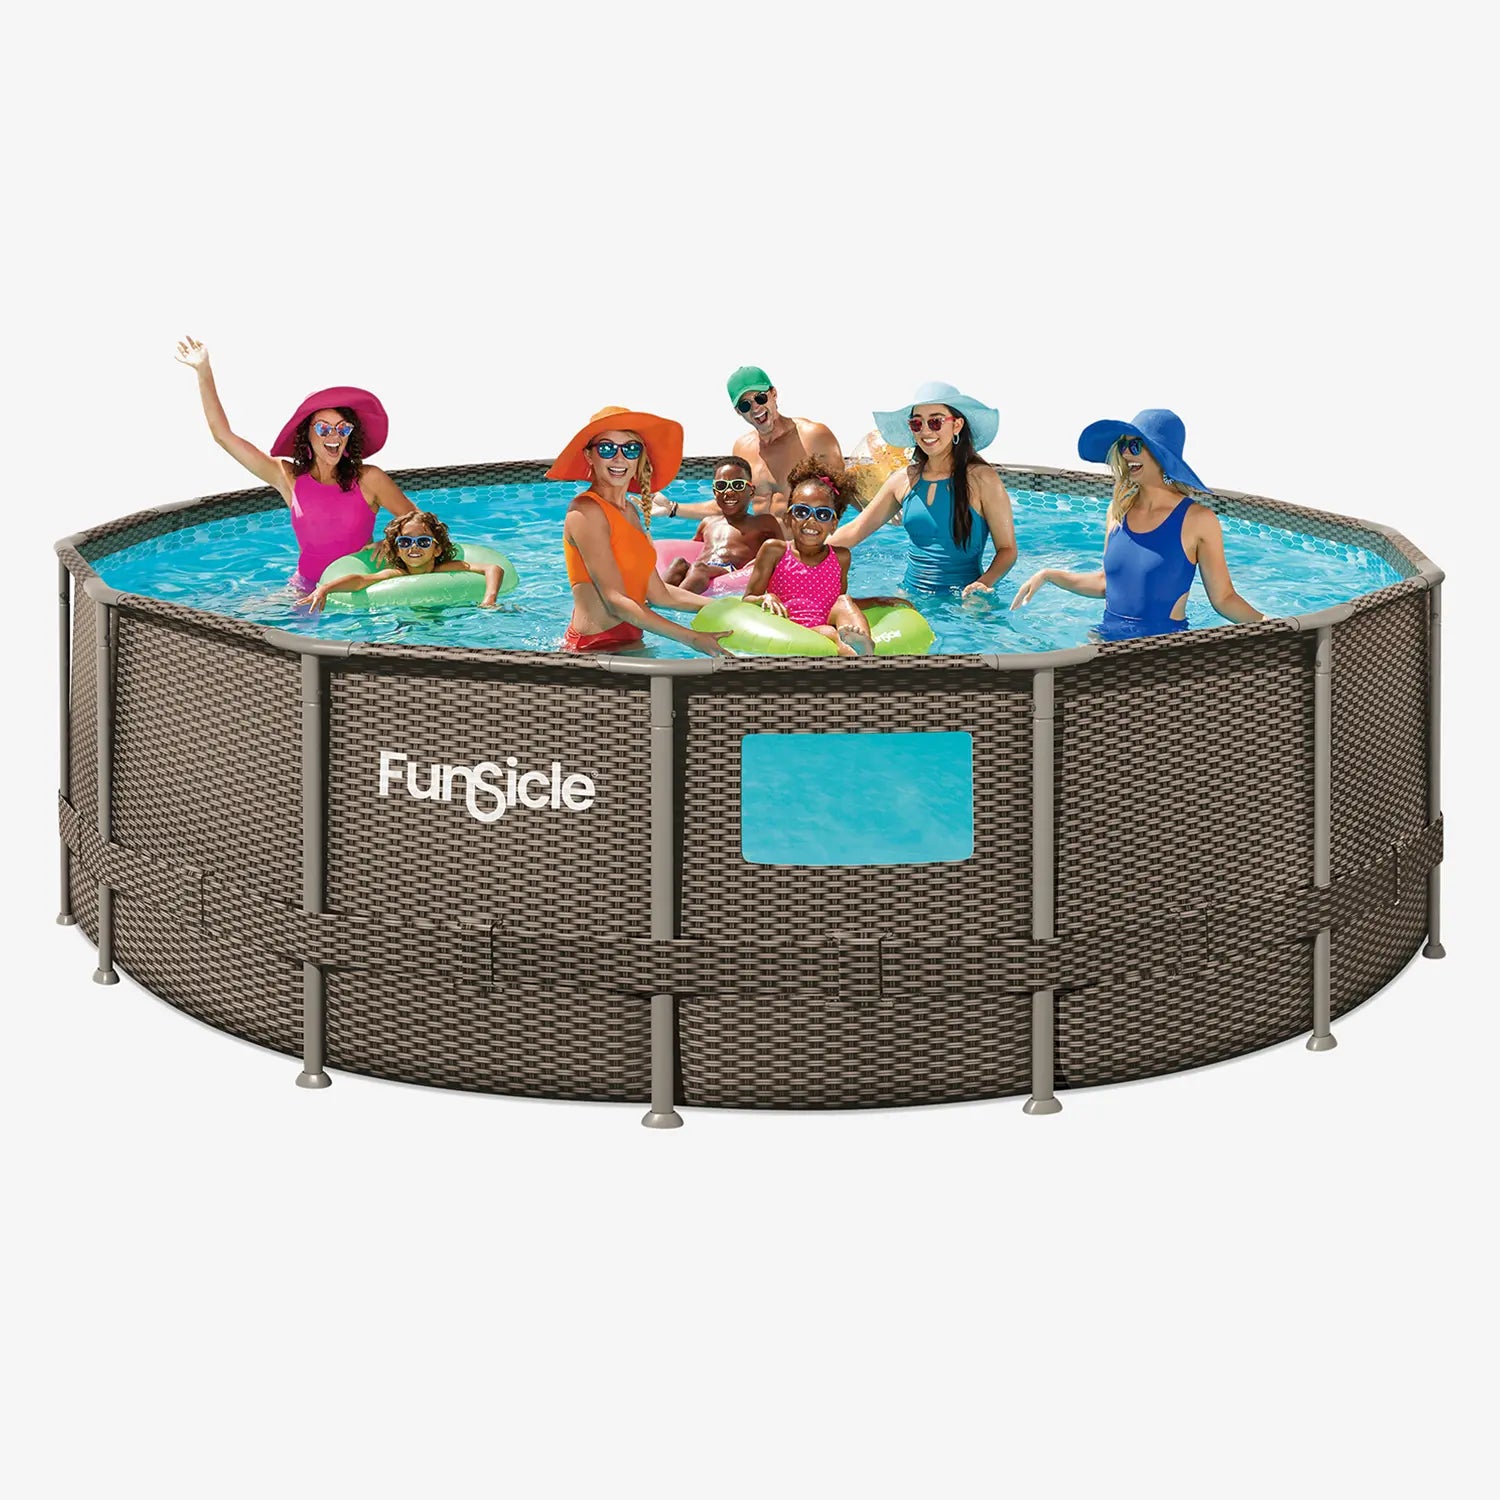 Funsicle 16 ft Crystal Vue Oasis Designer Pool - Dark Double Rattan with people